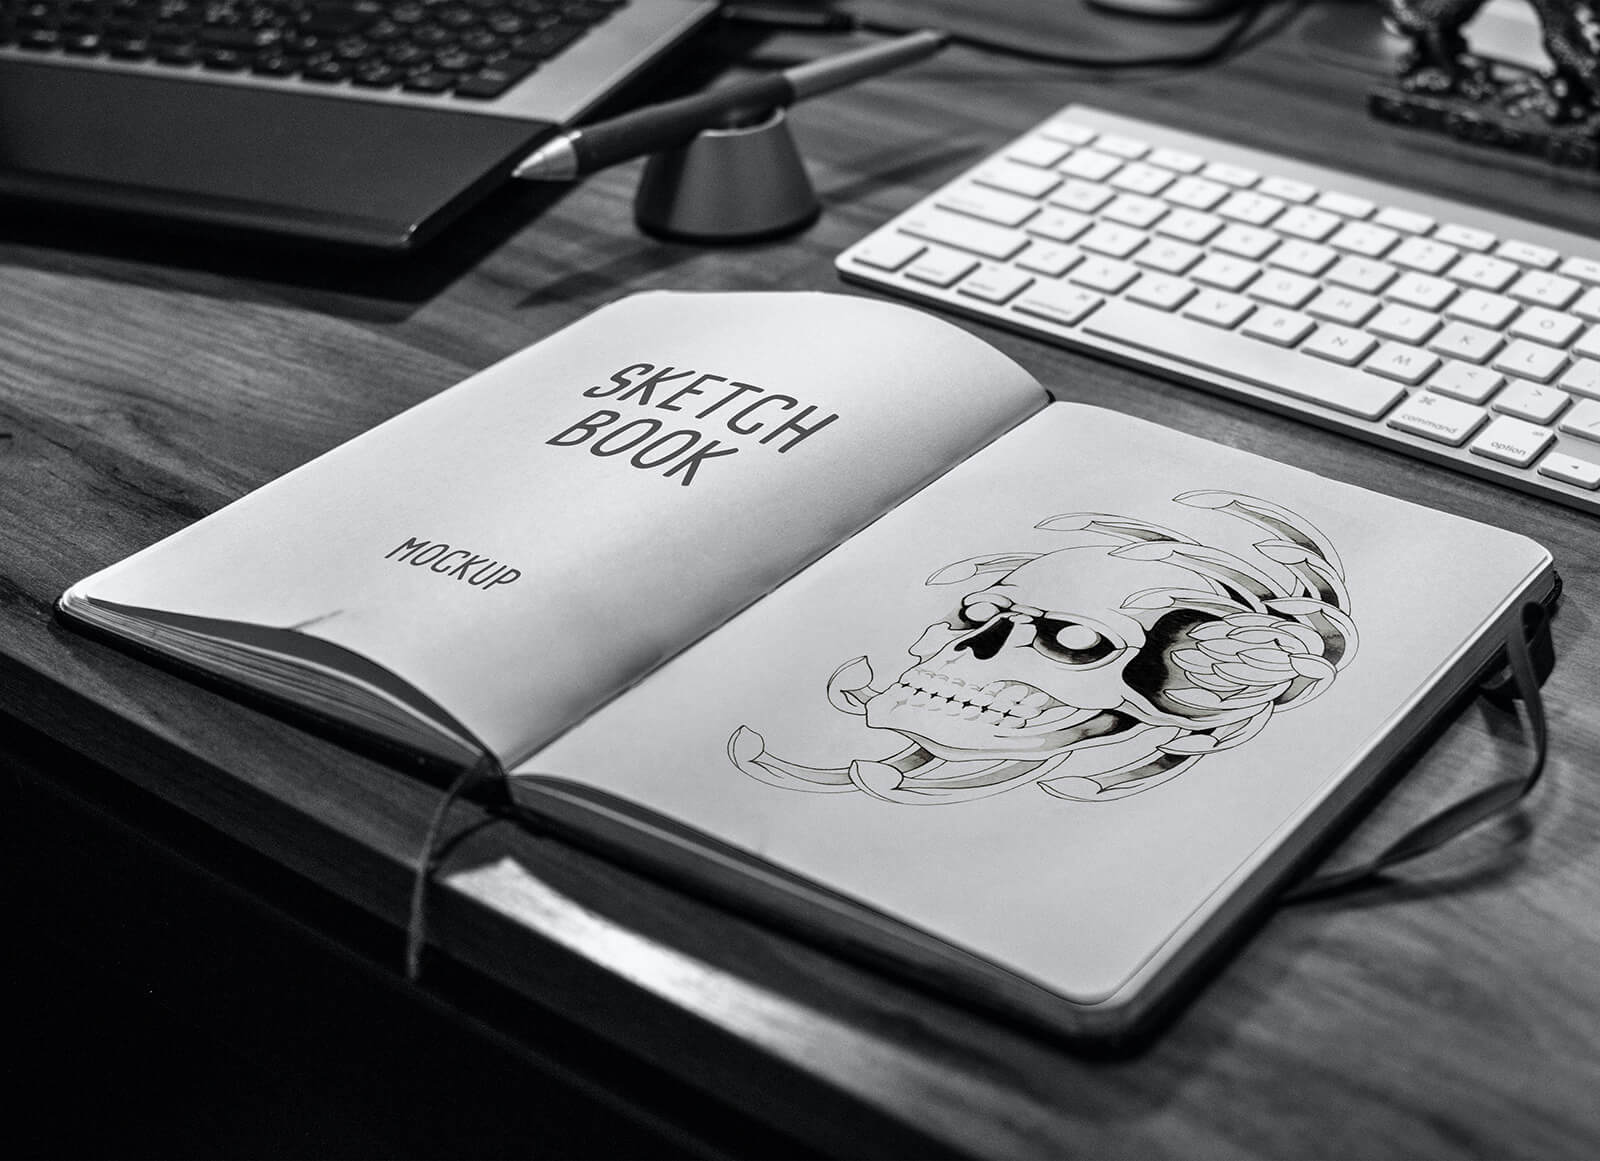 The Best Free Sketch Mockups and Kits | Free Mockups, Best Free PSD Mockups  - ApeMockups